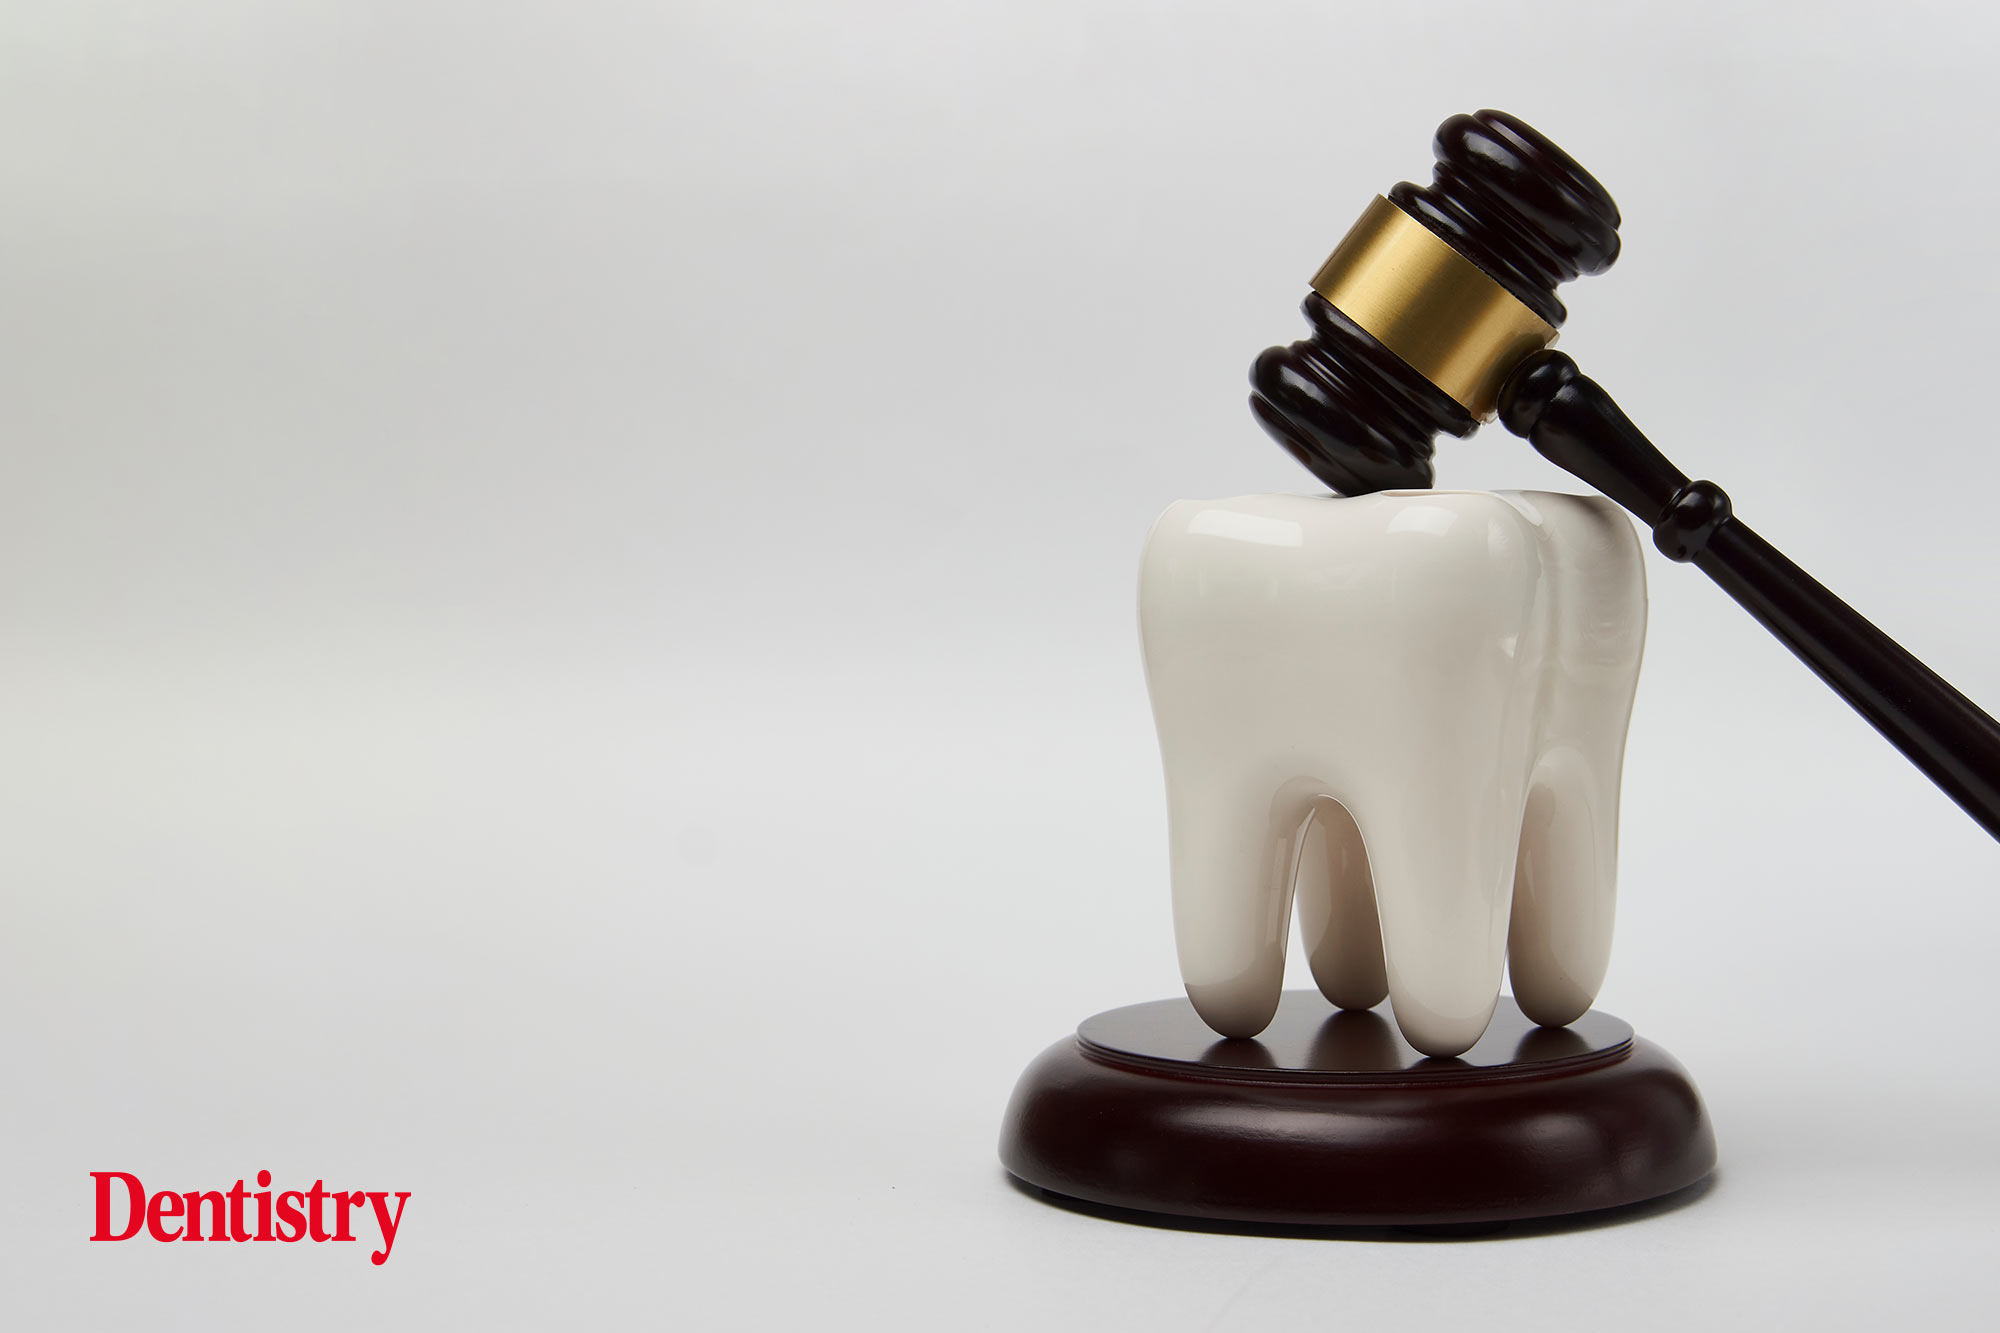 After the High Court overturned the GDC's decision to erase a dentist for charging top-up fees, we hear from people in the profession about what this means for dentistry and the GDC.